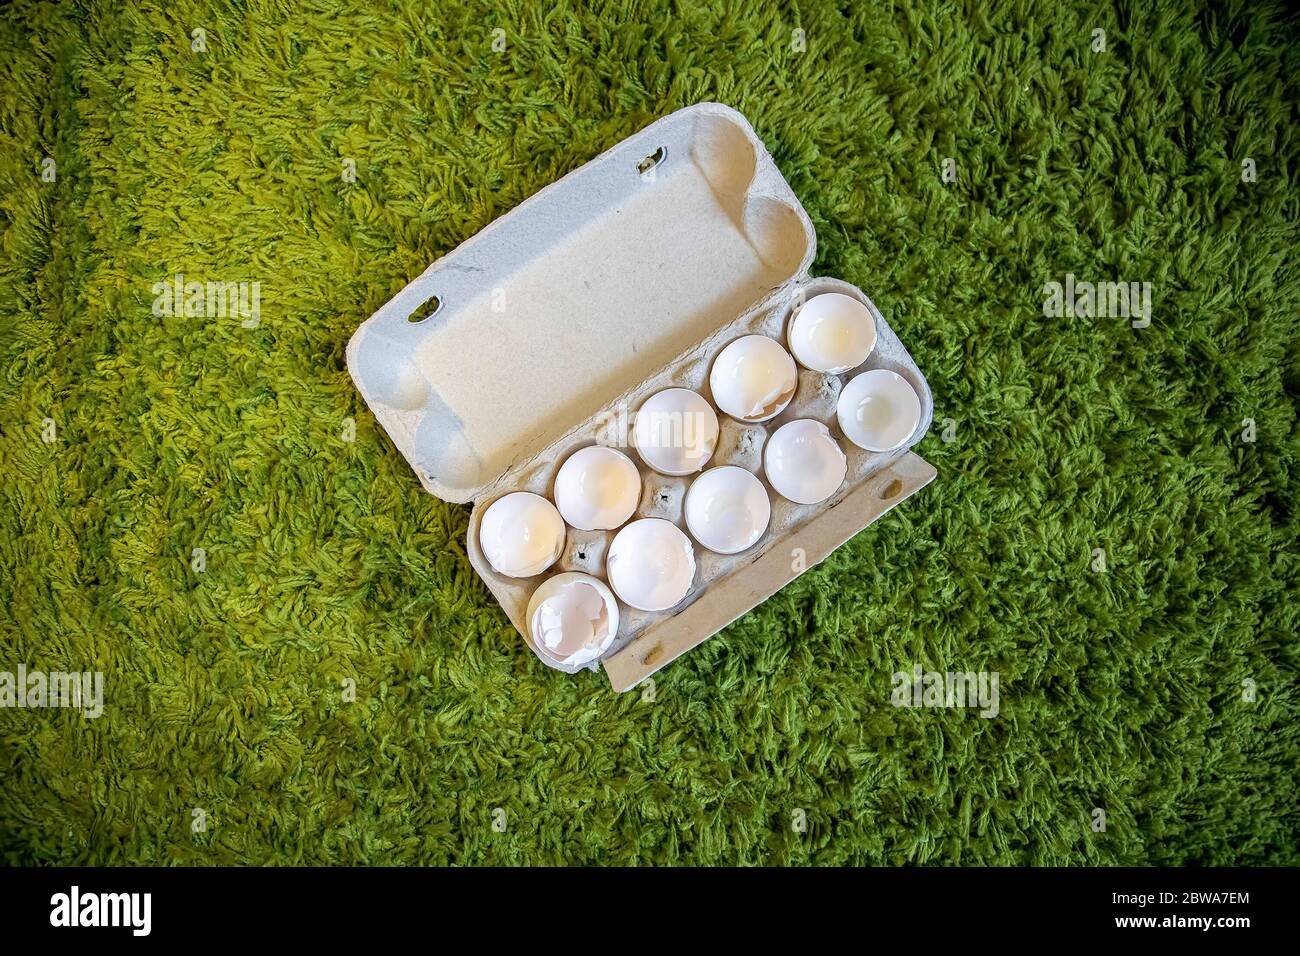 10 broken empty egg shells lie in a box on artificial grass. top view, close-up Stock Photo